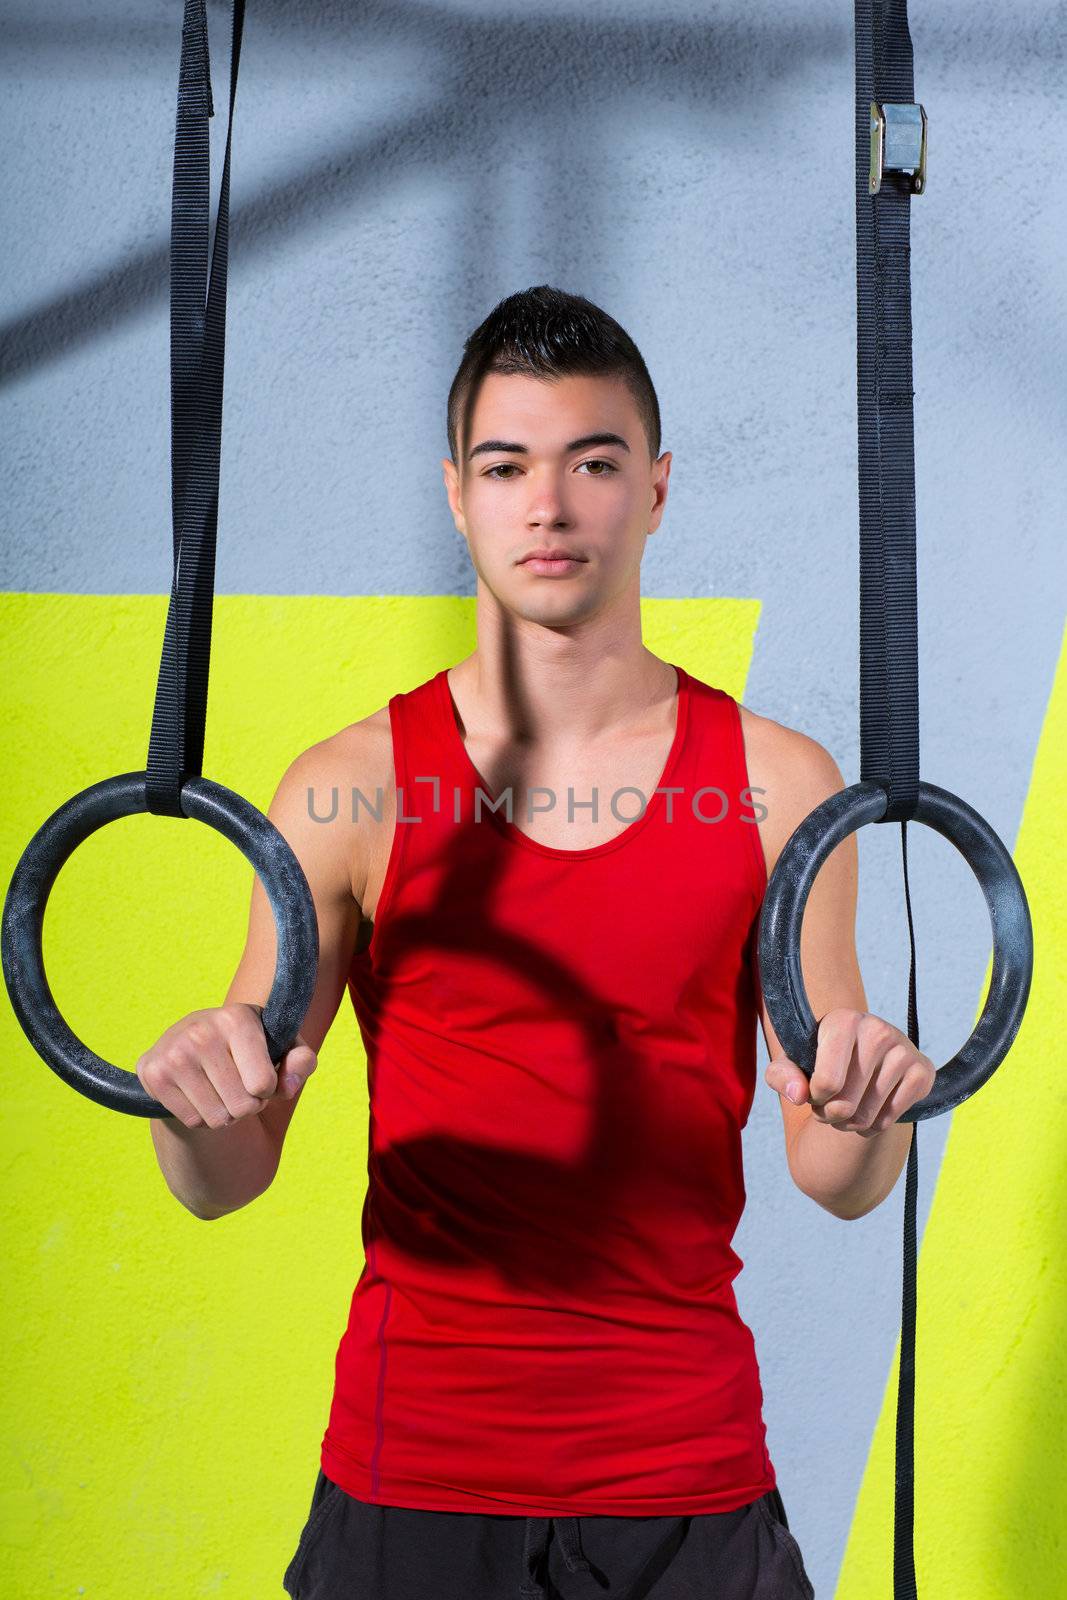 Crossfit dip ring young man relaxed after workout at gym dipping exercise